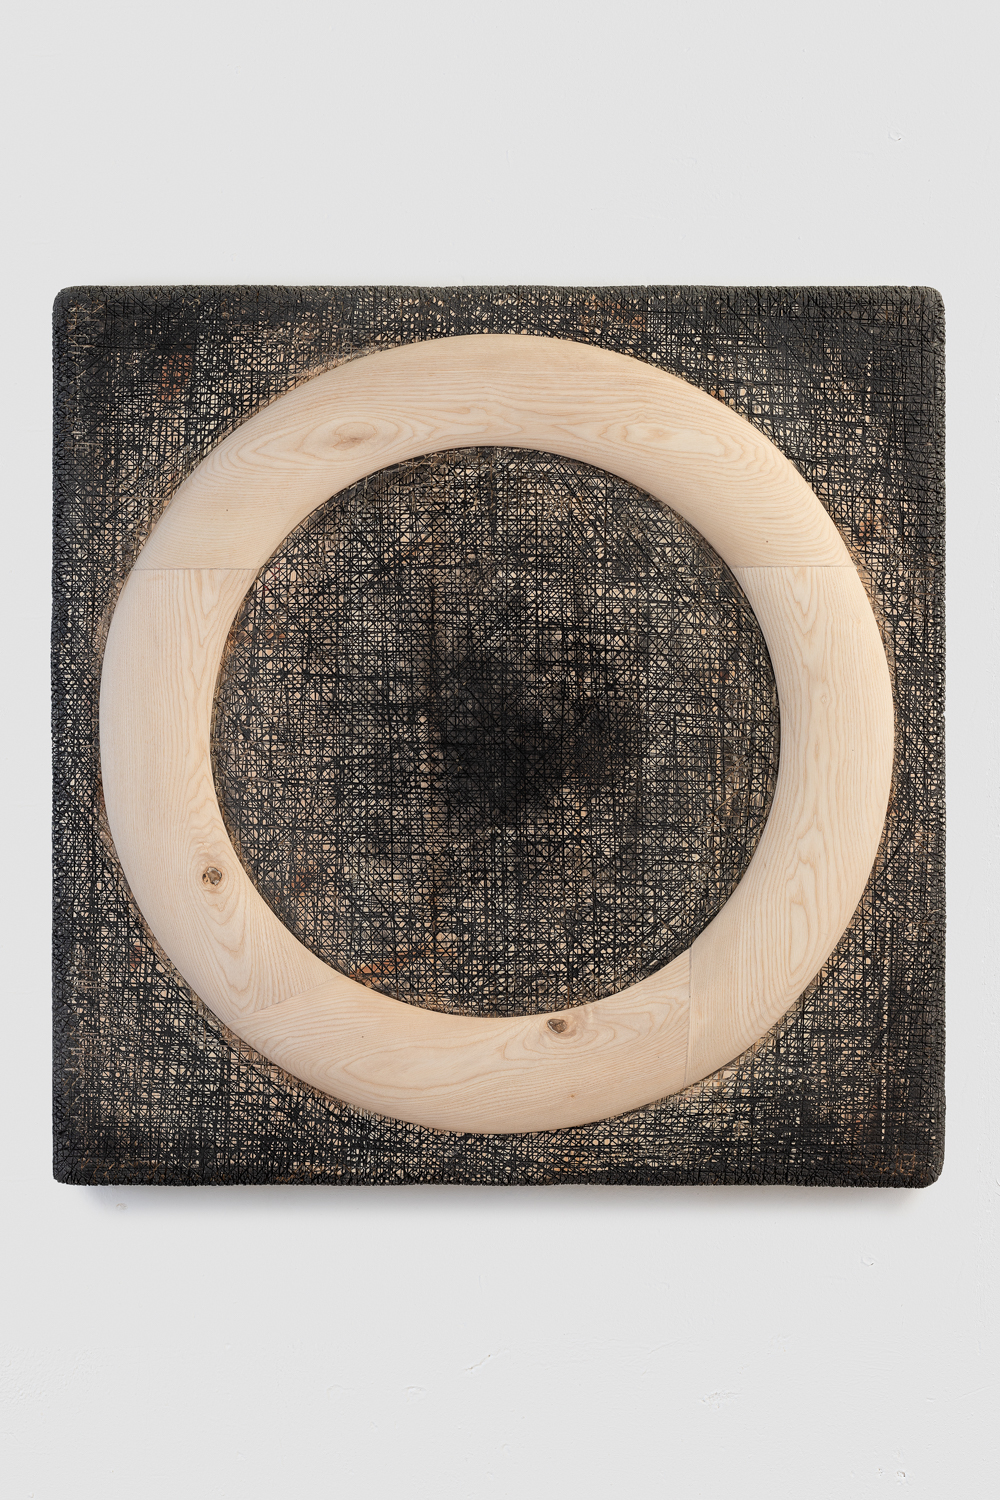 Wood Nº21 (square with white circle on black) (1) copy